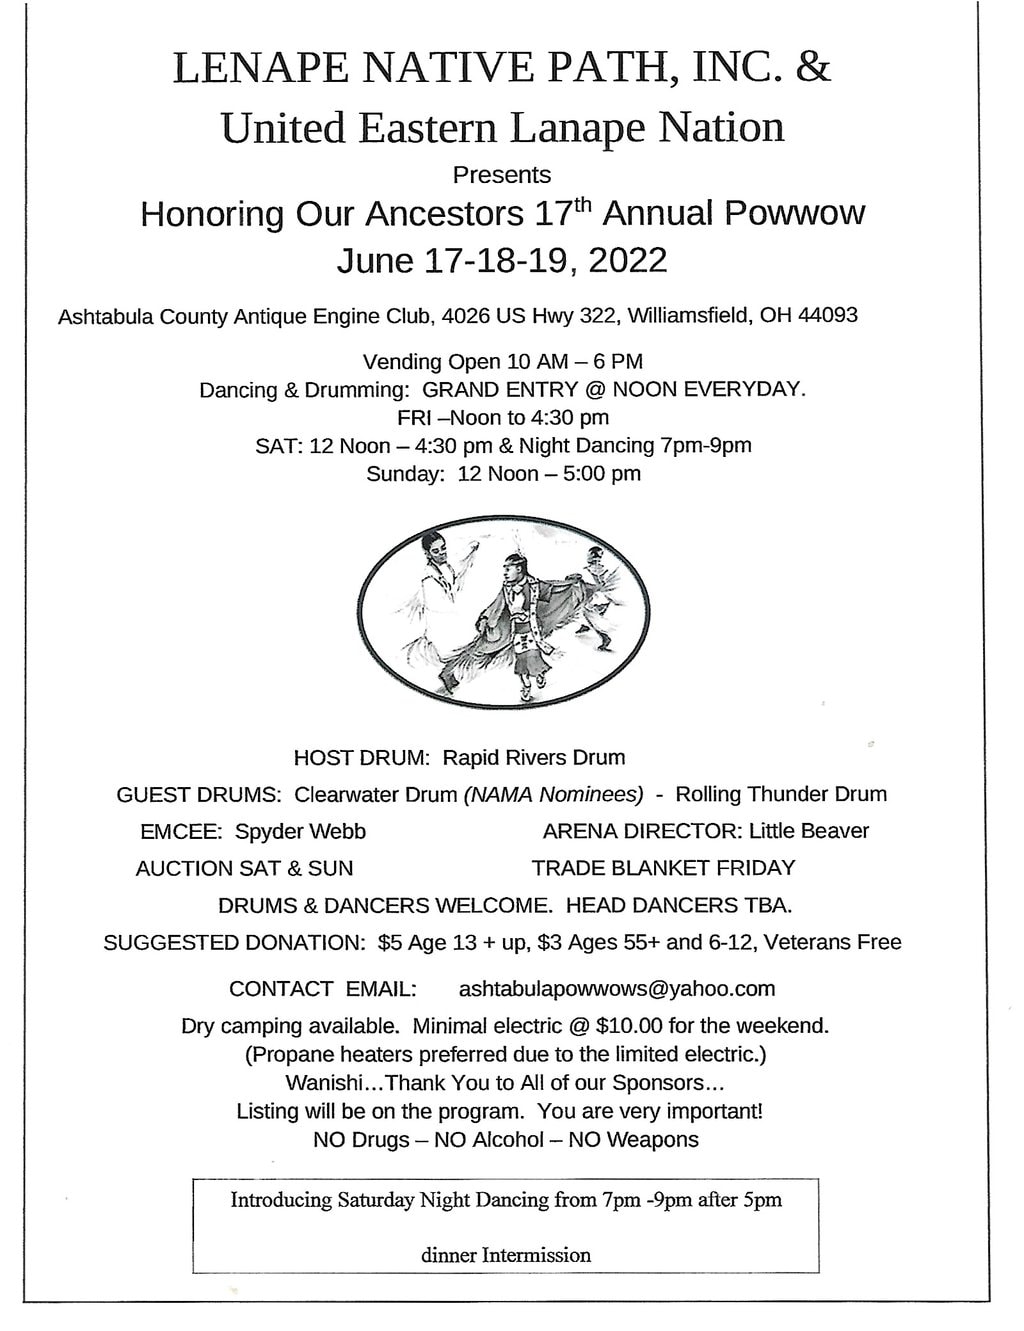 Honoring Our Ancestors 17th Annual Pow Wow 2022